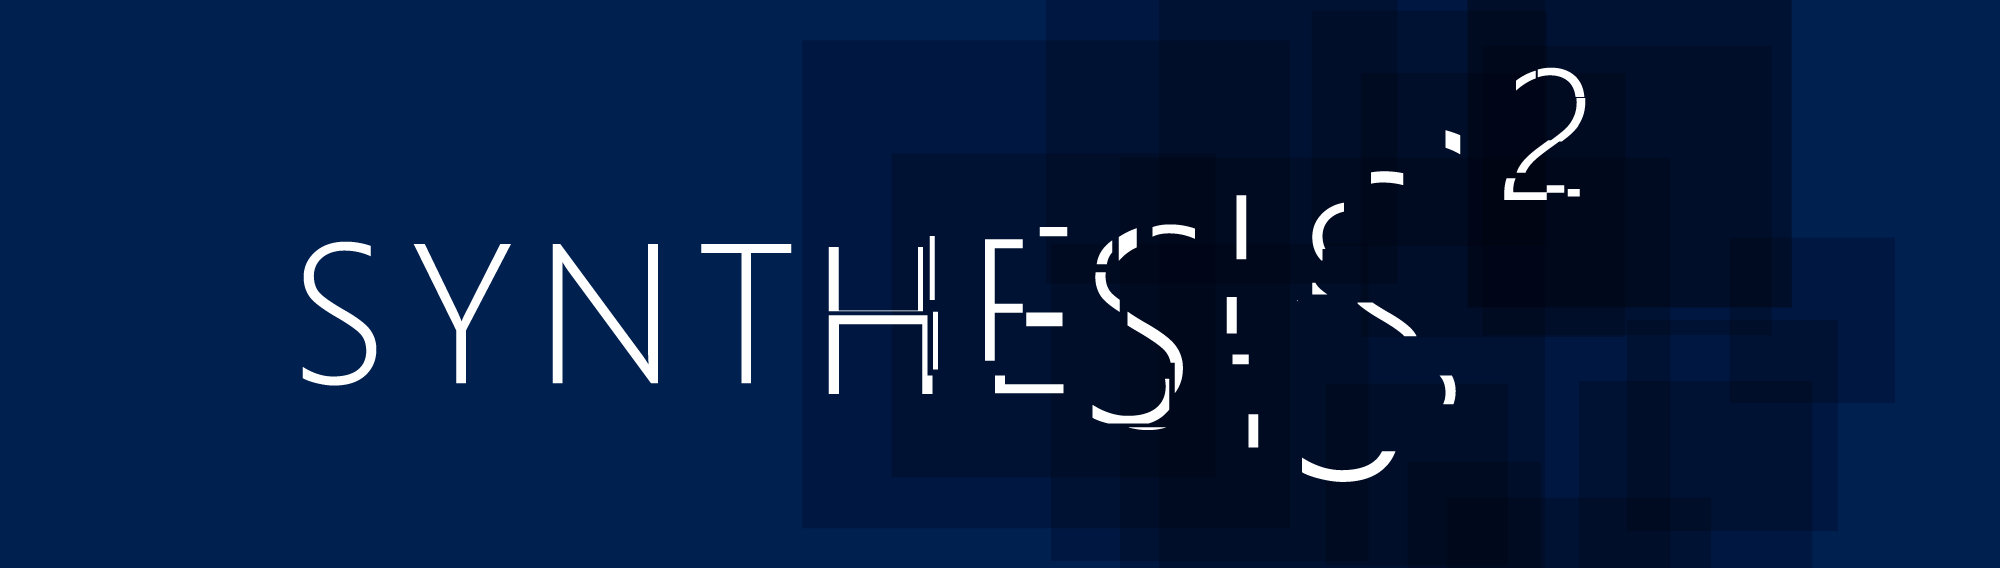 Microsoft Synthesis banner